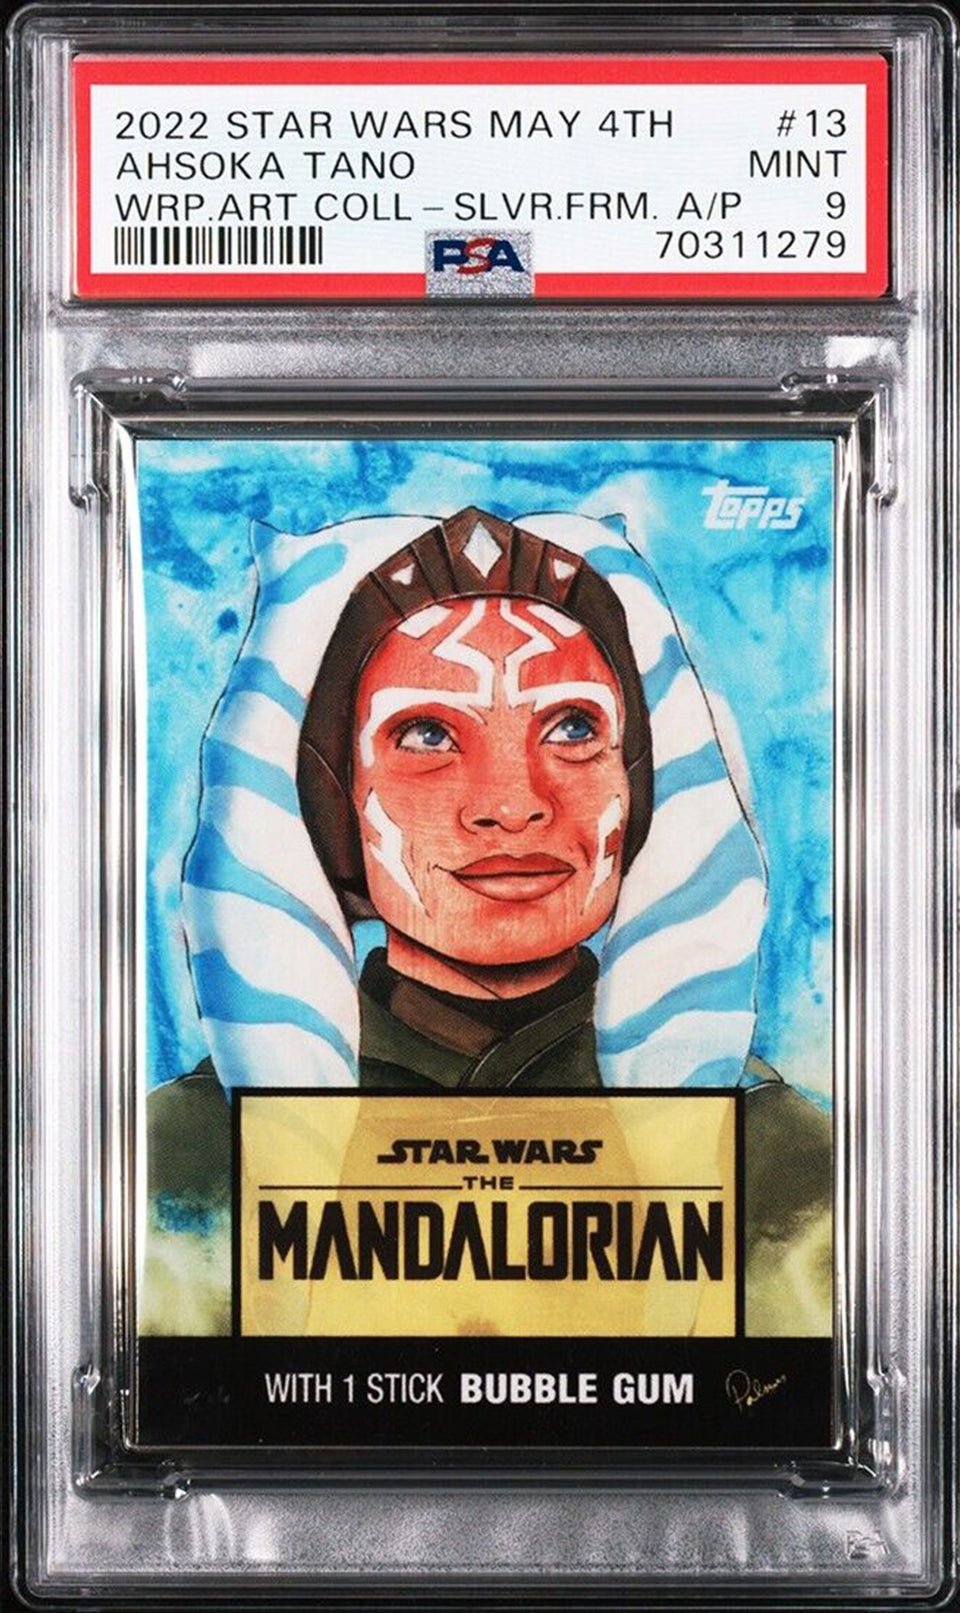 AHSOKA TANO PSA 9 2022 Star Wars May 4TH Wrapper Art Artist Proof #13 34/49 Star Wars Graded Cards Parallel Serial Numbered - Hobby Gems